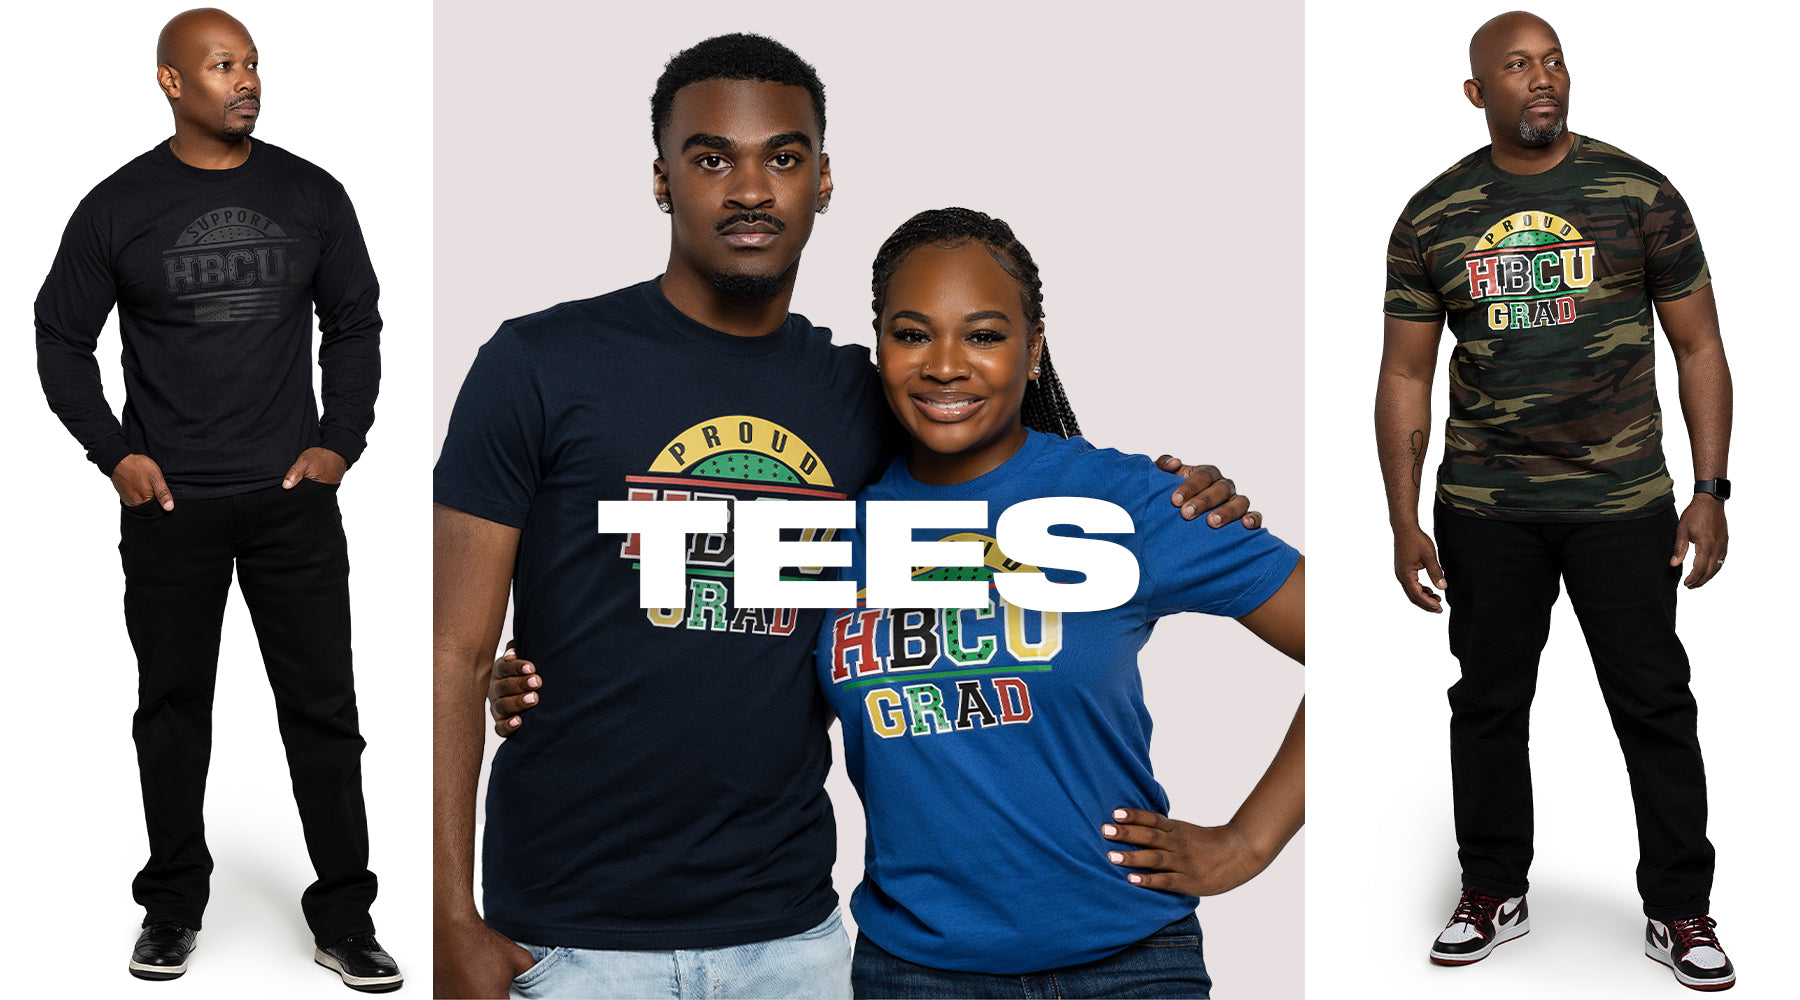 SUPPORT HBCUs TEES